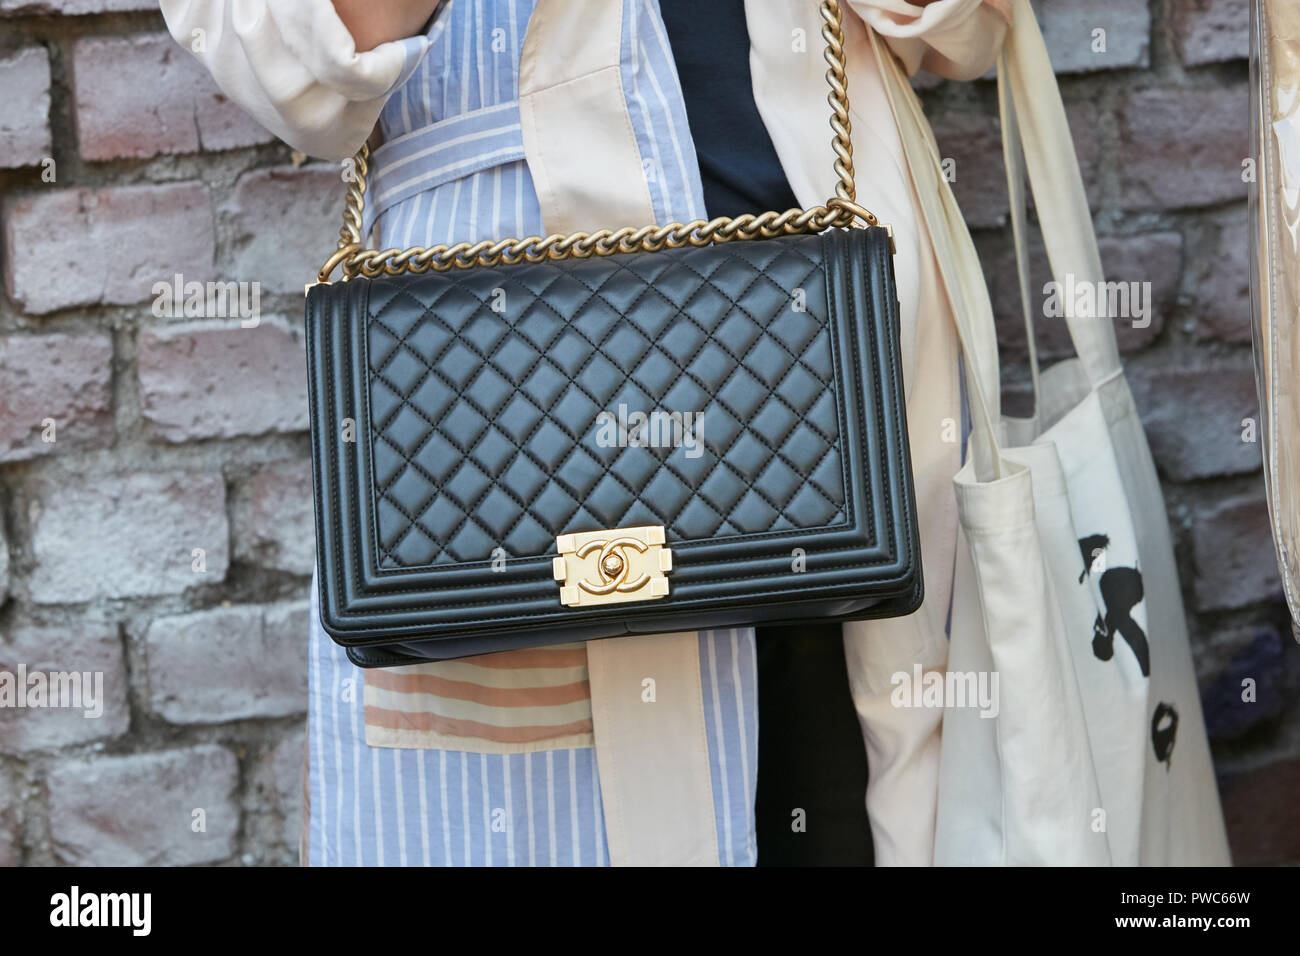 MILAN, ITALY - SEPTEMBER 20, 2018: Woman with black Chanel leather bag ...